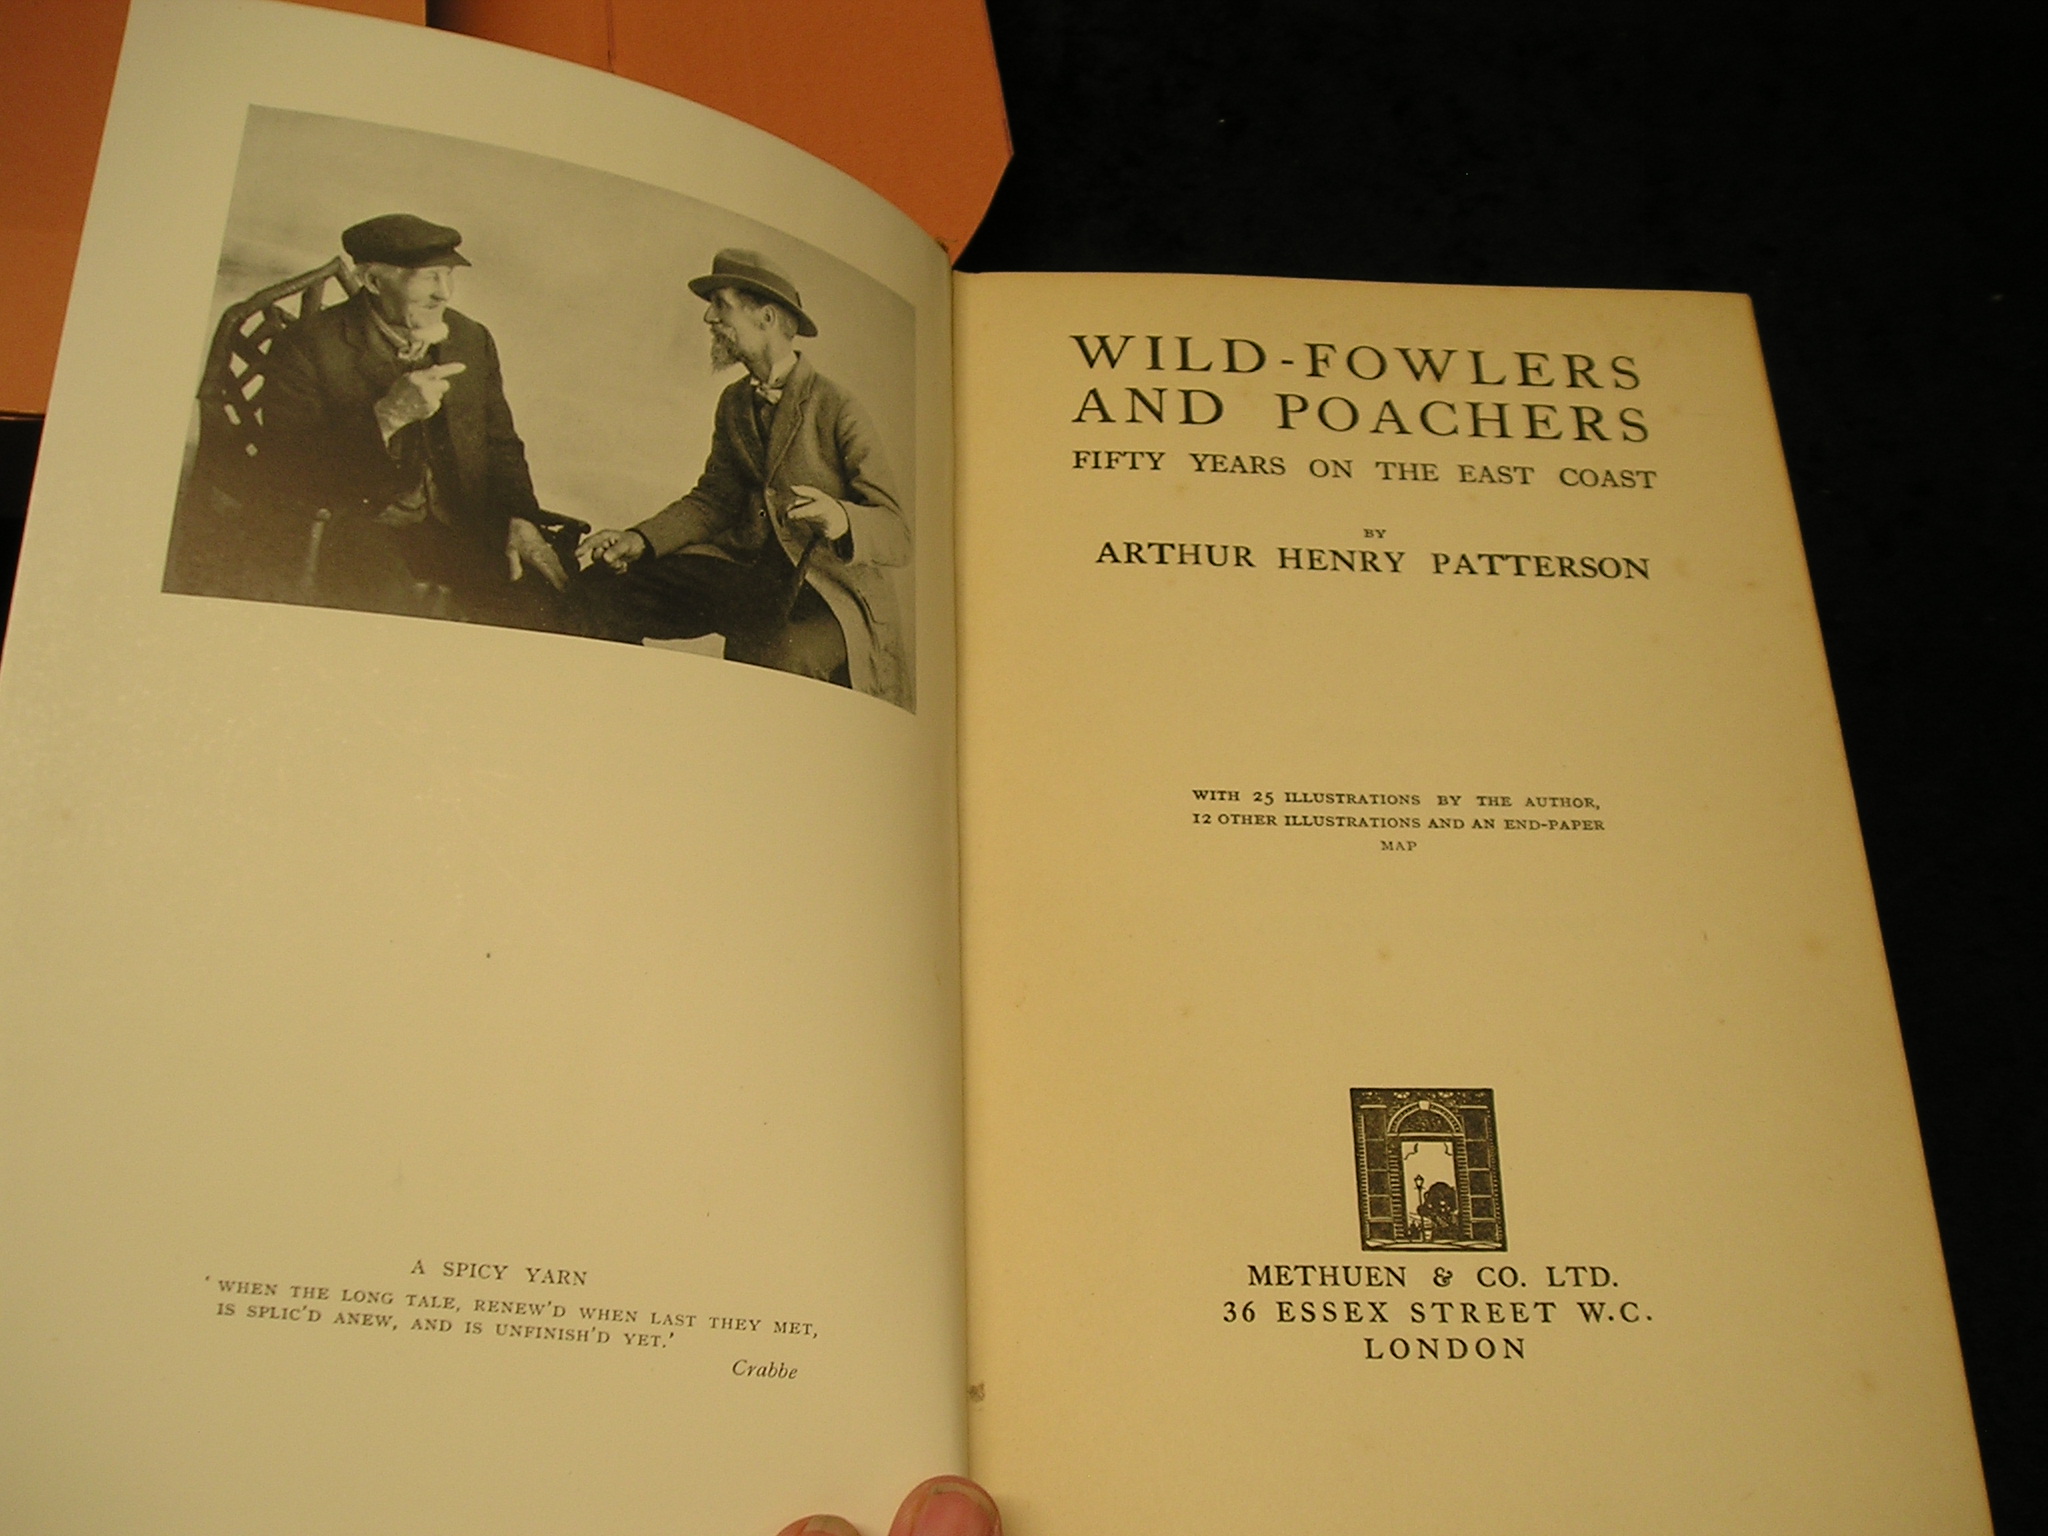 Wild-Fowlers and Poachers